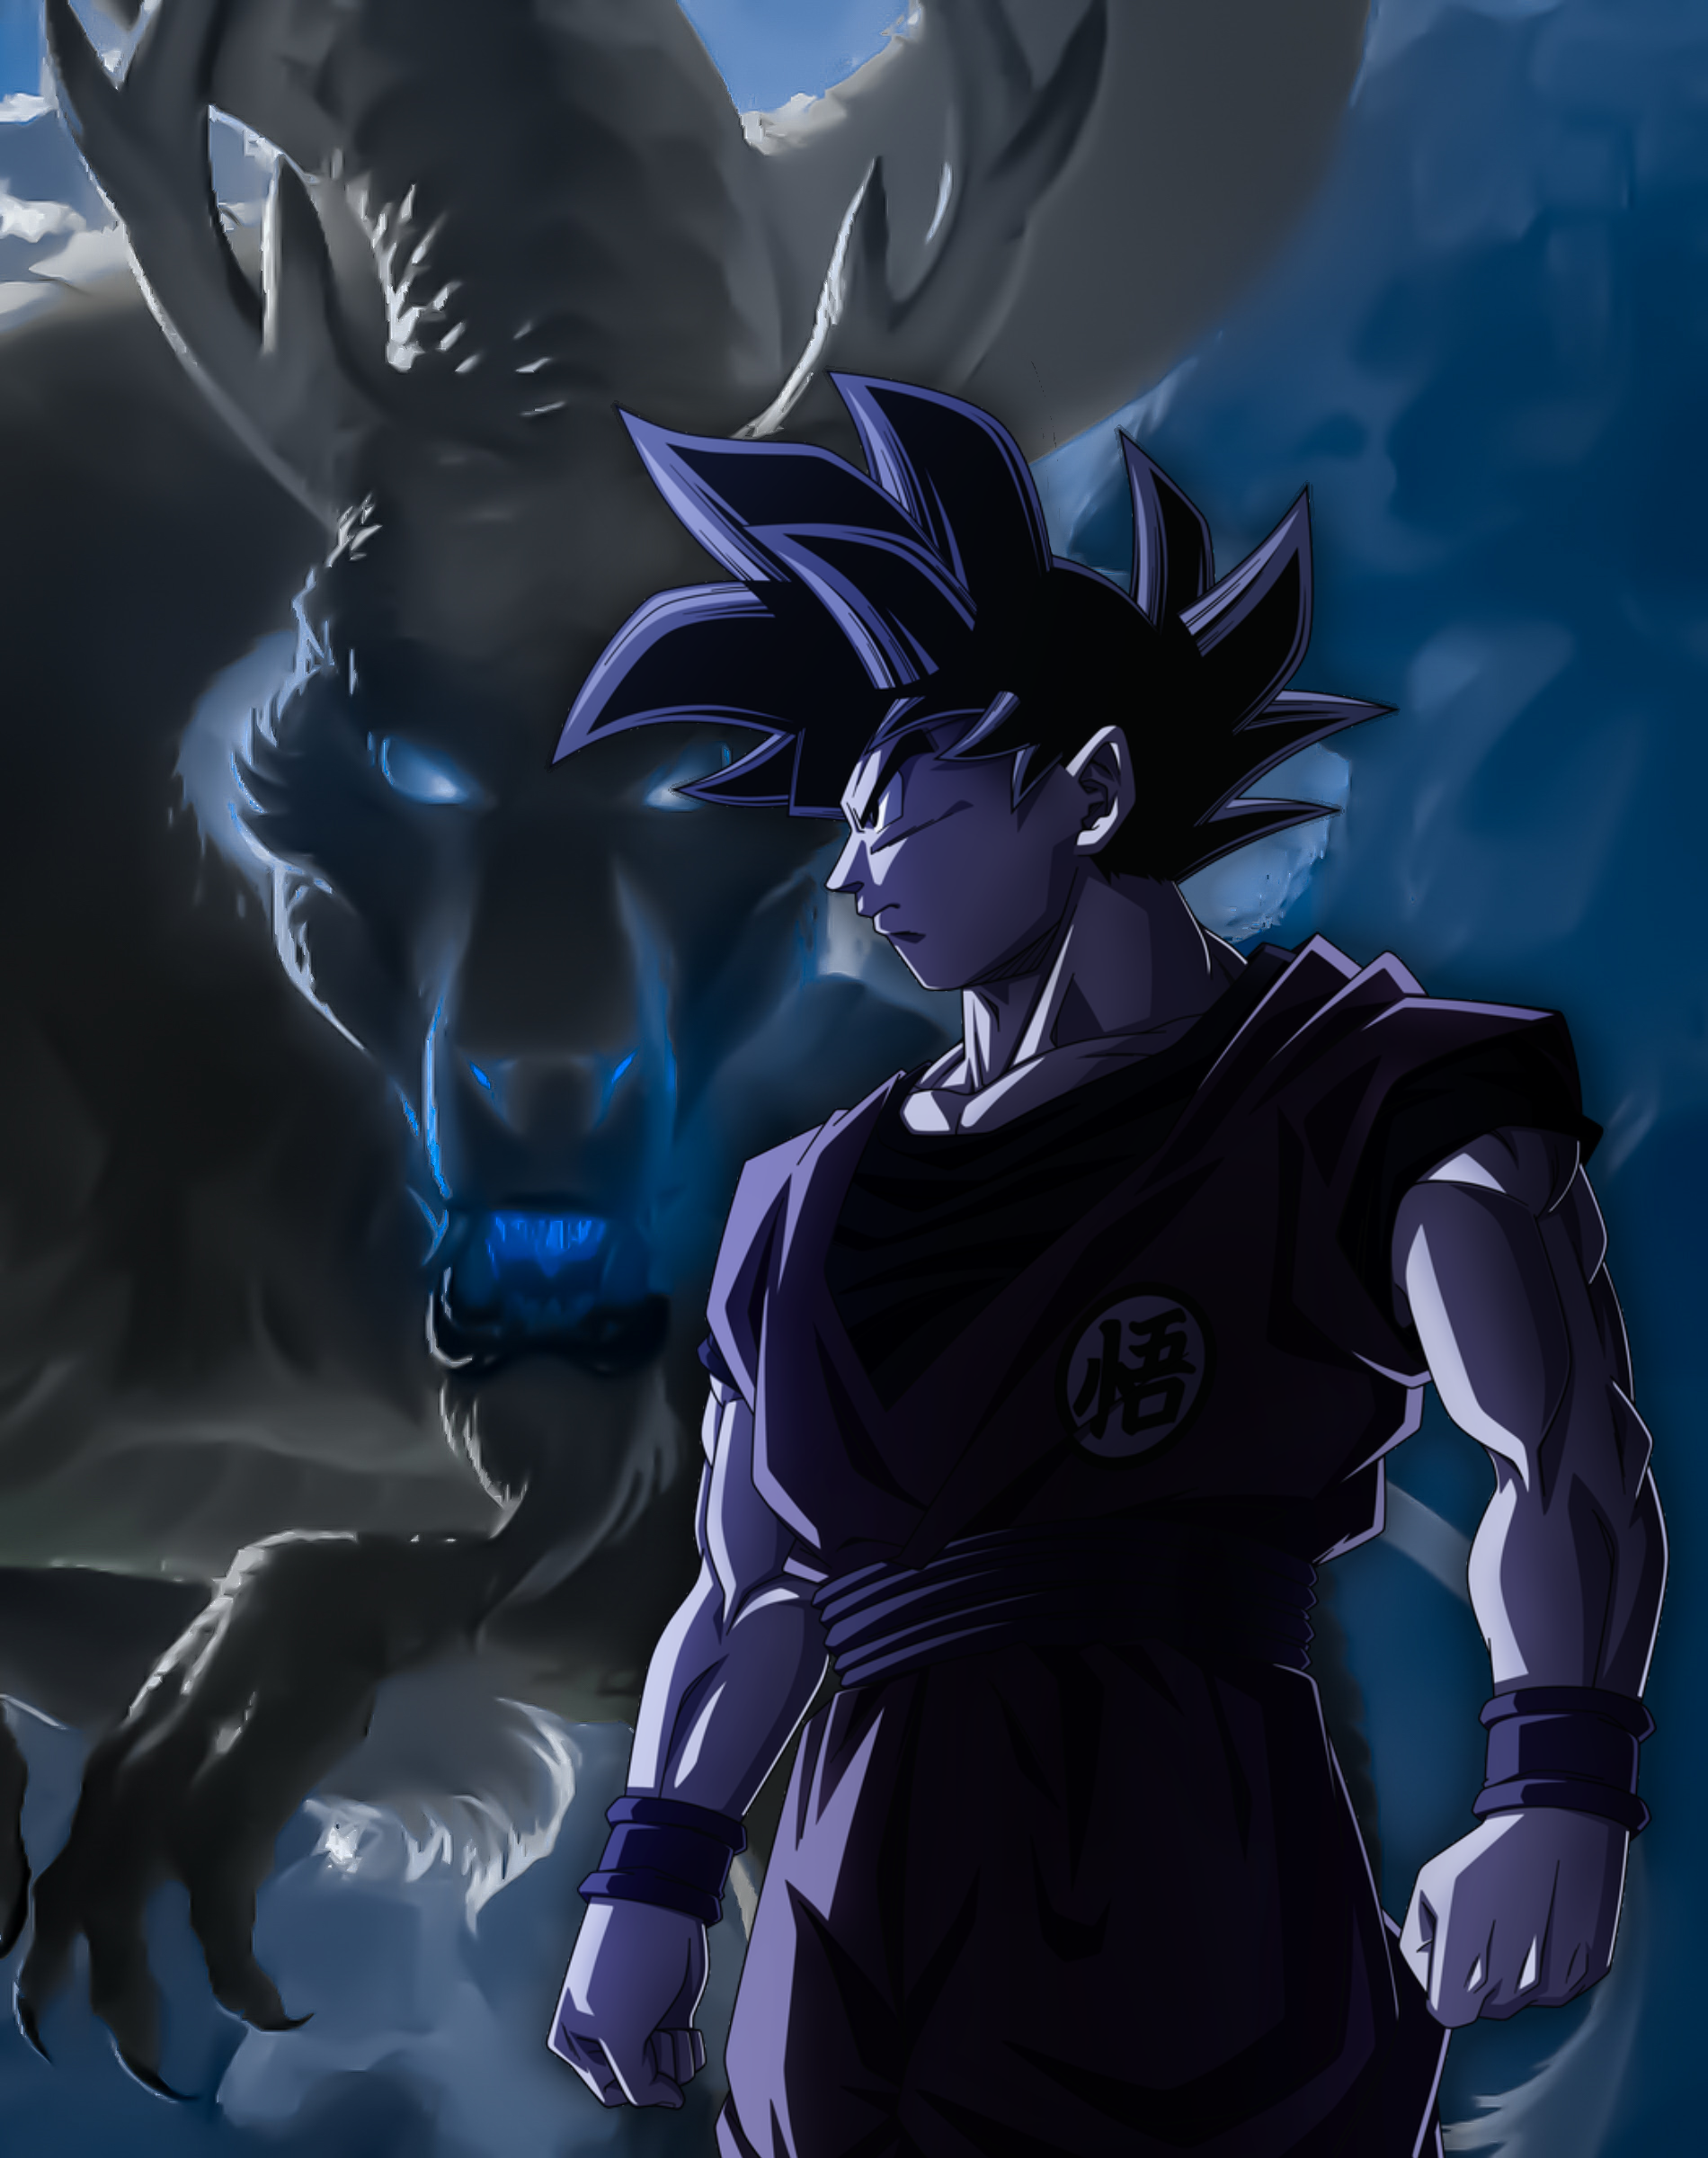 Oob and Boo by AriezGao on DeviantArt  Dragon ball art goku, Anime dragon  ball super, Dragon ball art